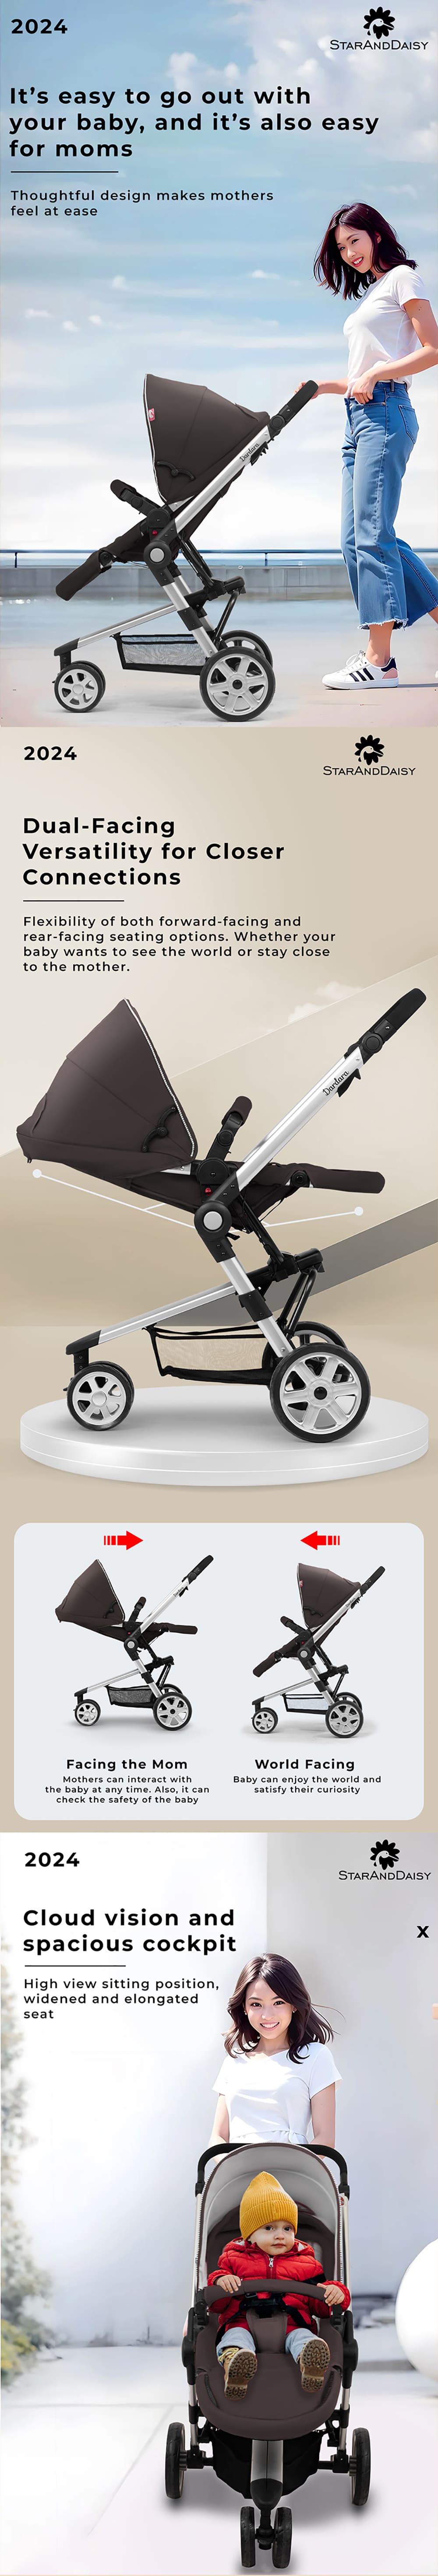 Baby Stroller with Dual-Facing Seating